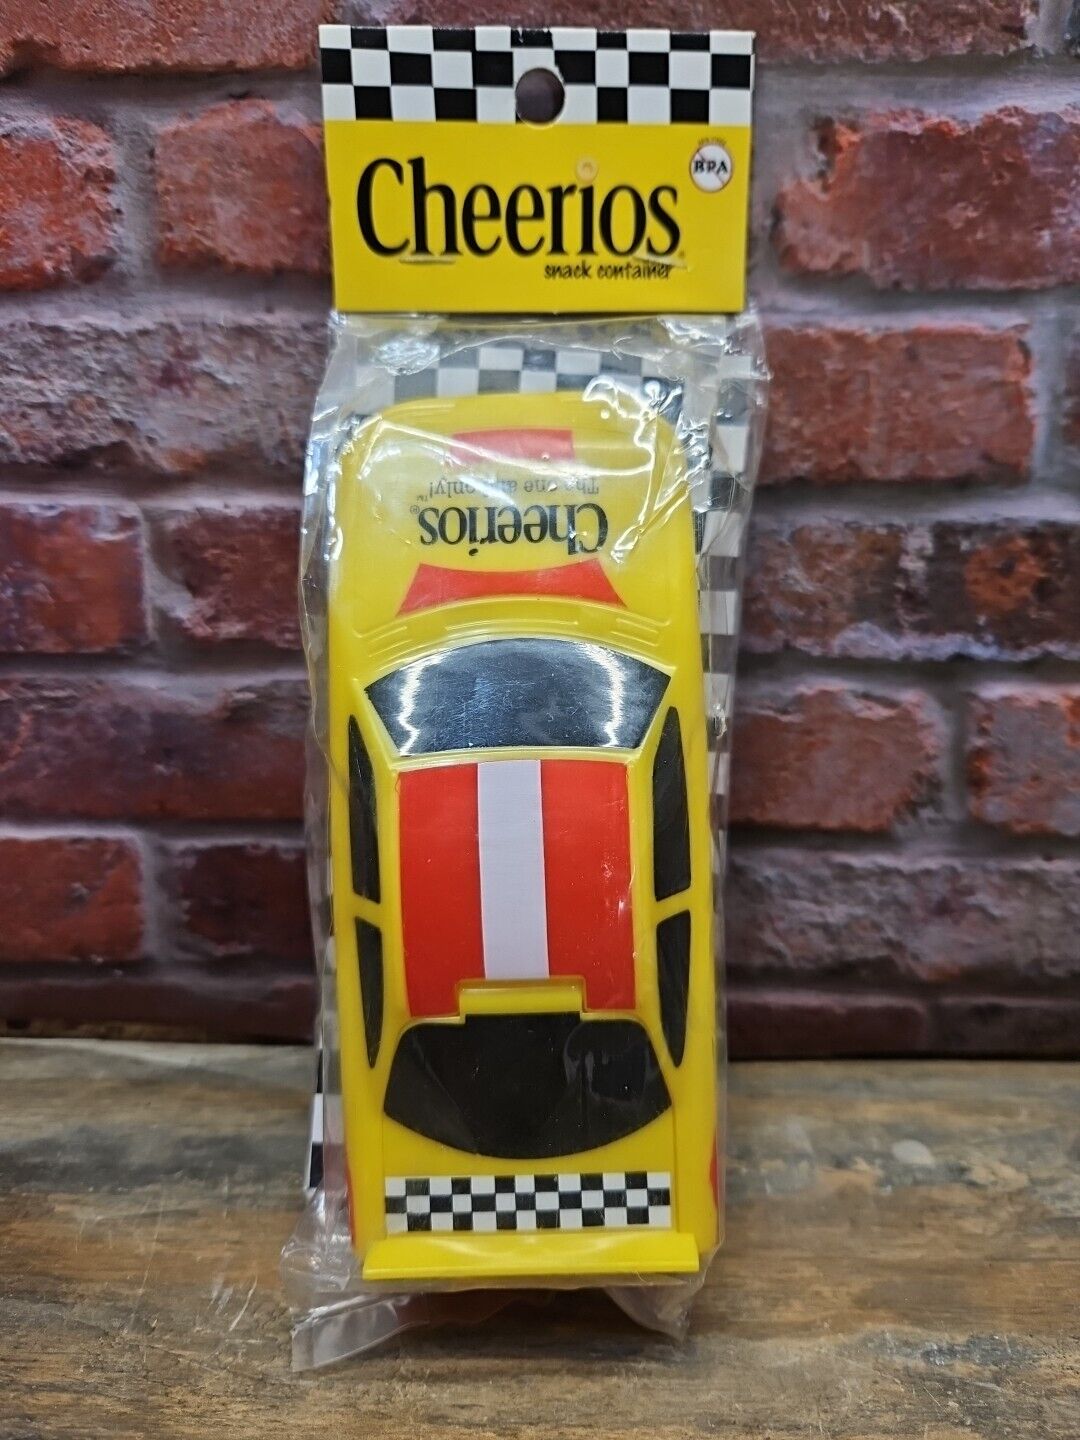 Cheerios Race Car Snack Container Holds 1 Cup of Snacks